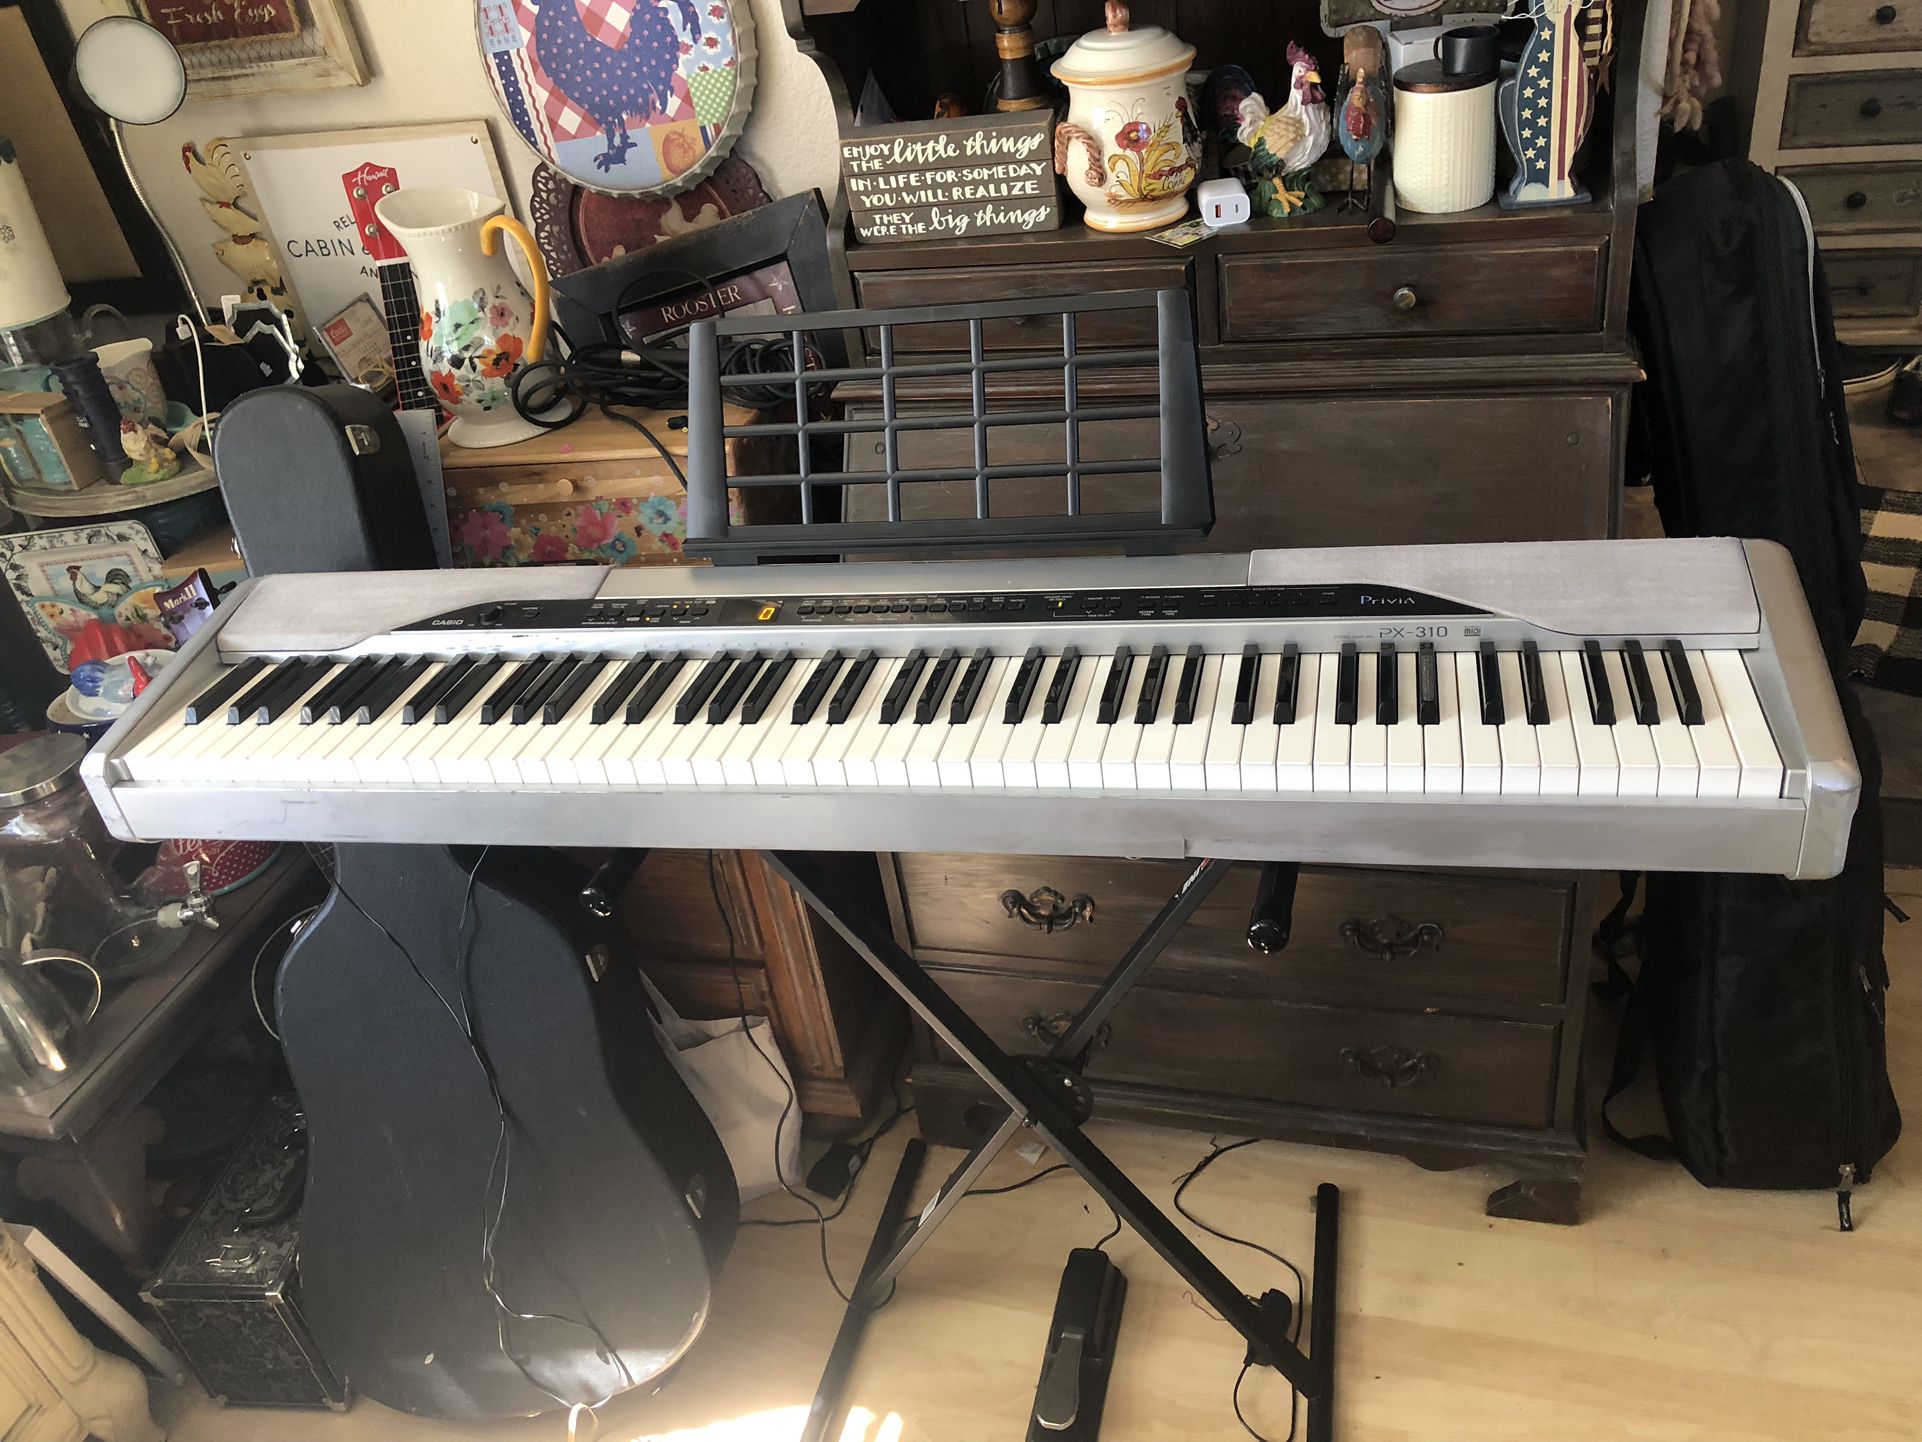 88-Key Casio Privia PX-310 Electronic Piano Pkg! WEIGHTED KEYS!